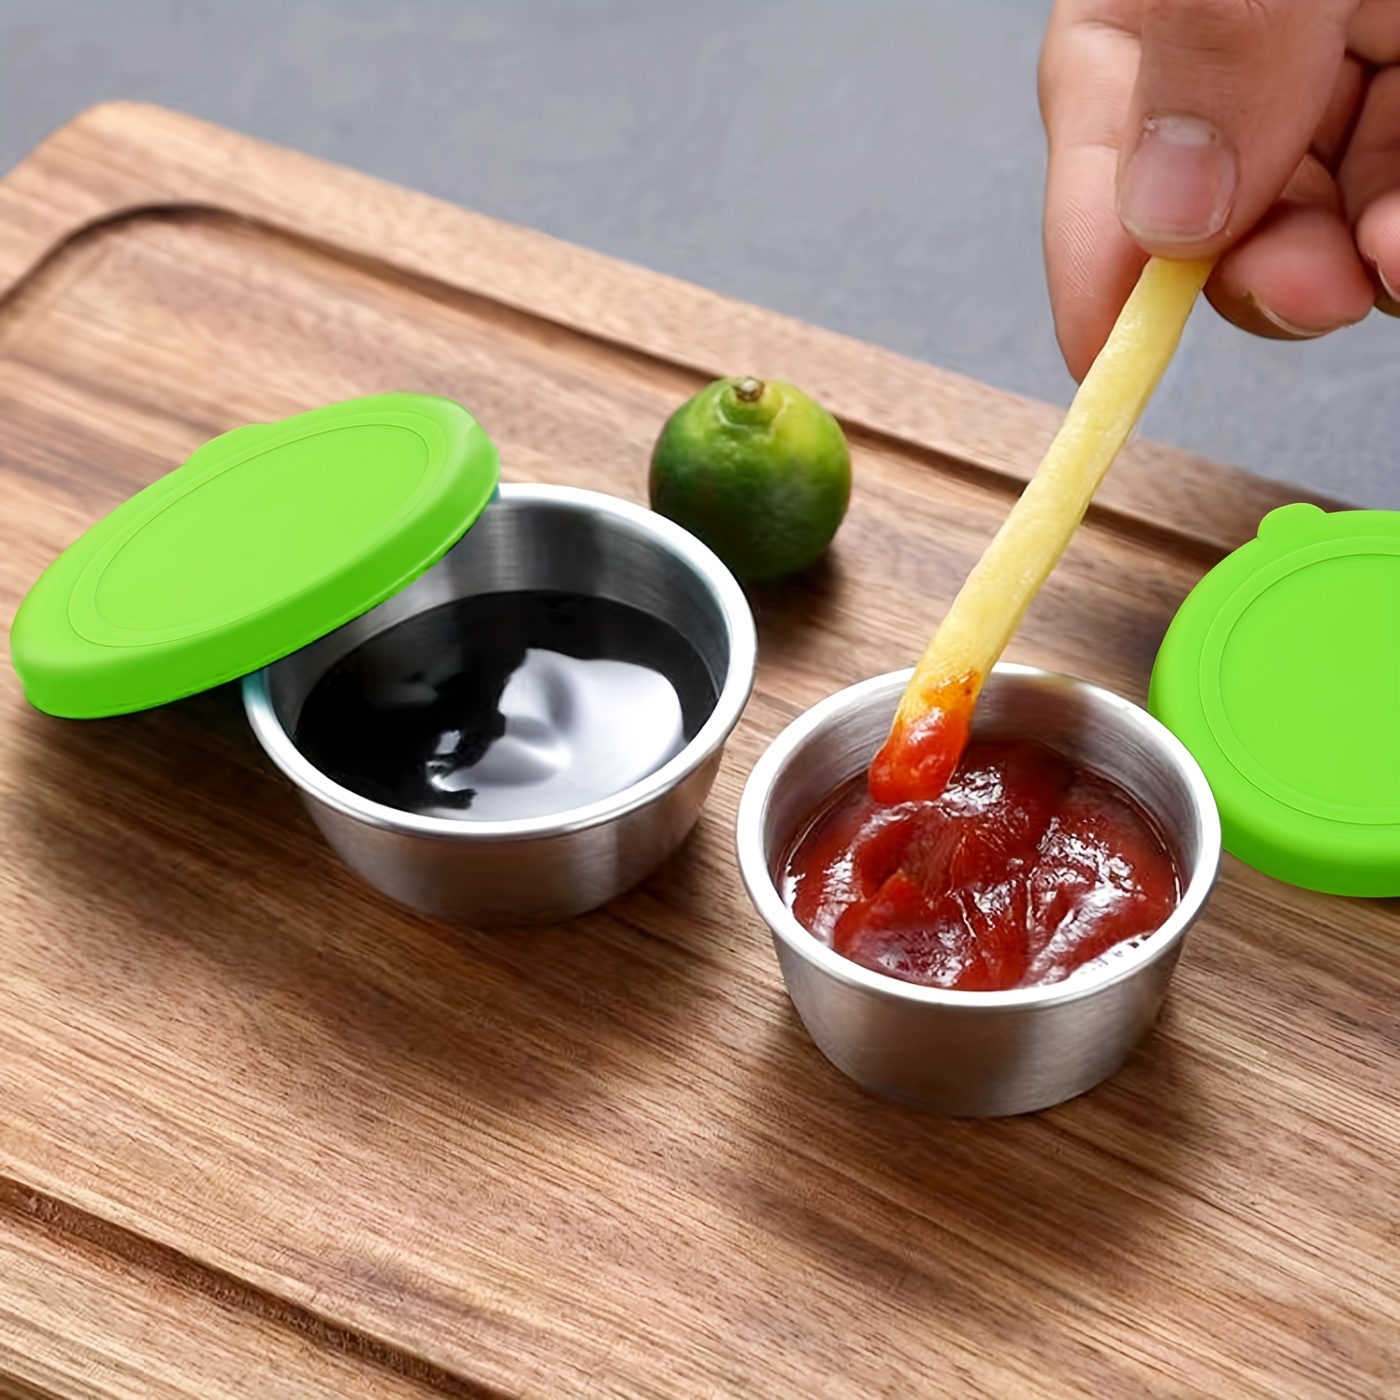 Salad Dressing Container To Go Reusable Stainless Steel Sauce Cups